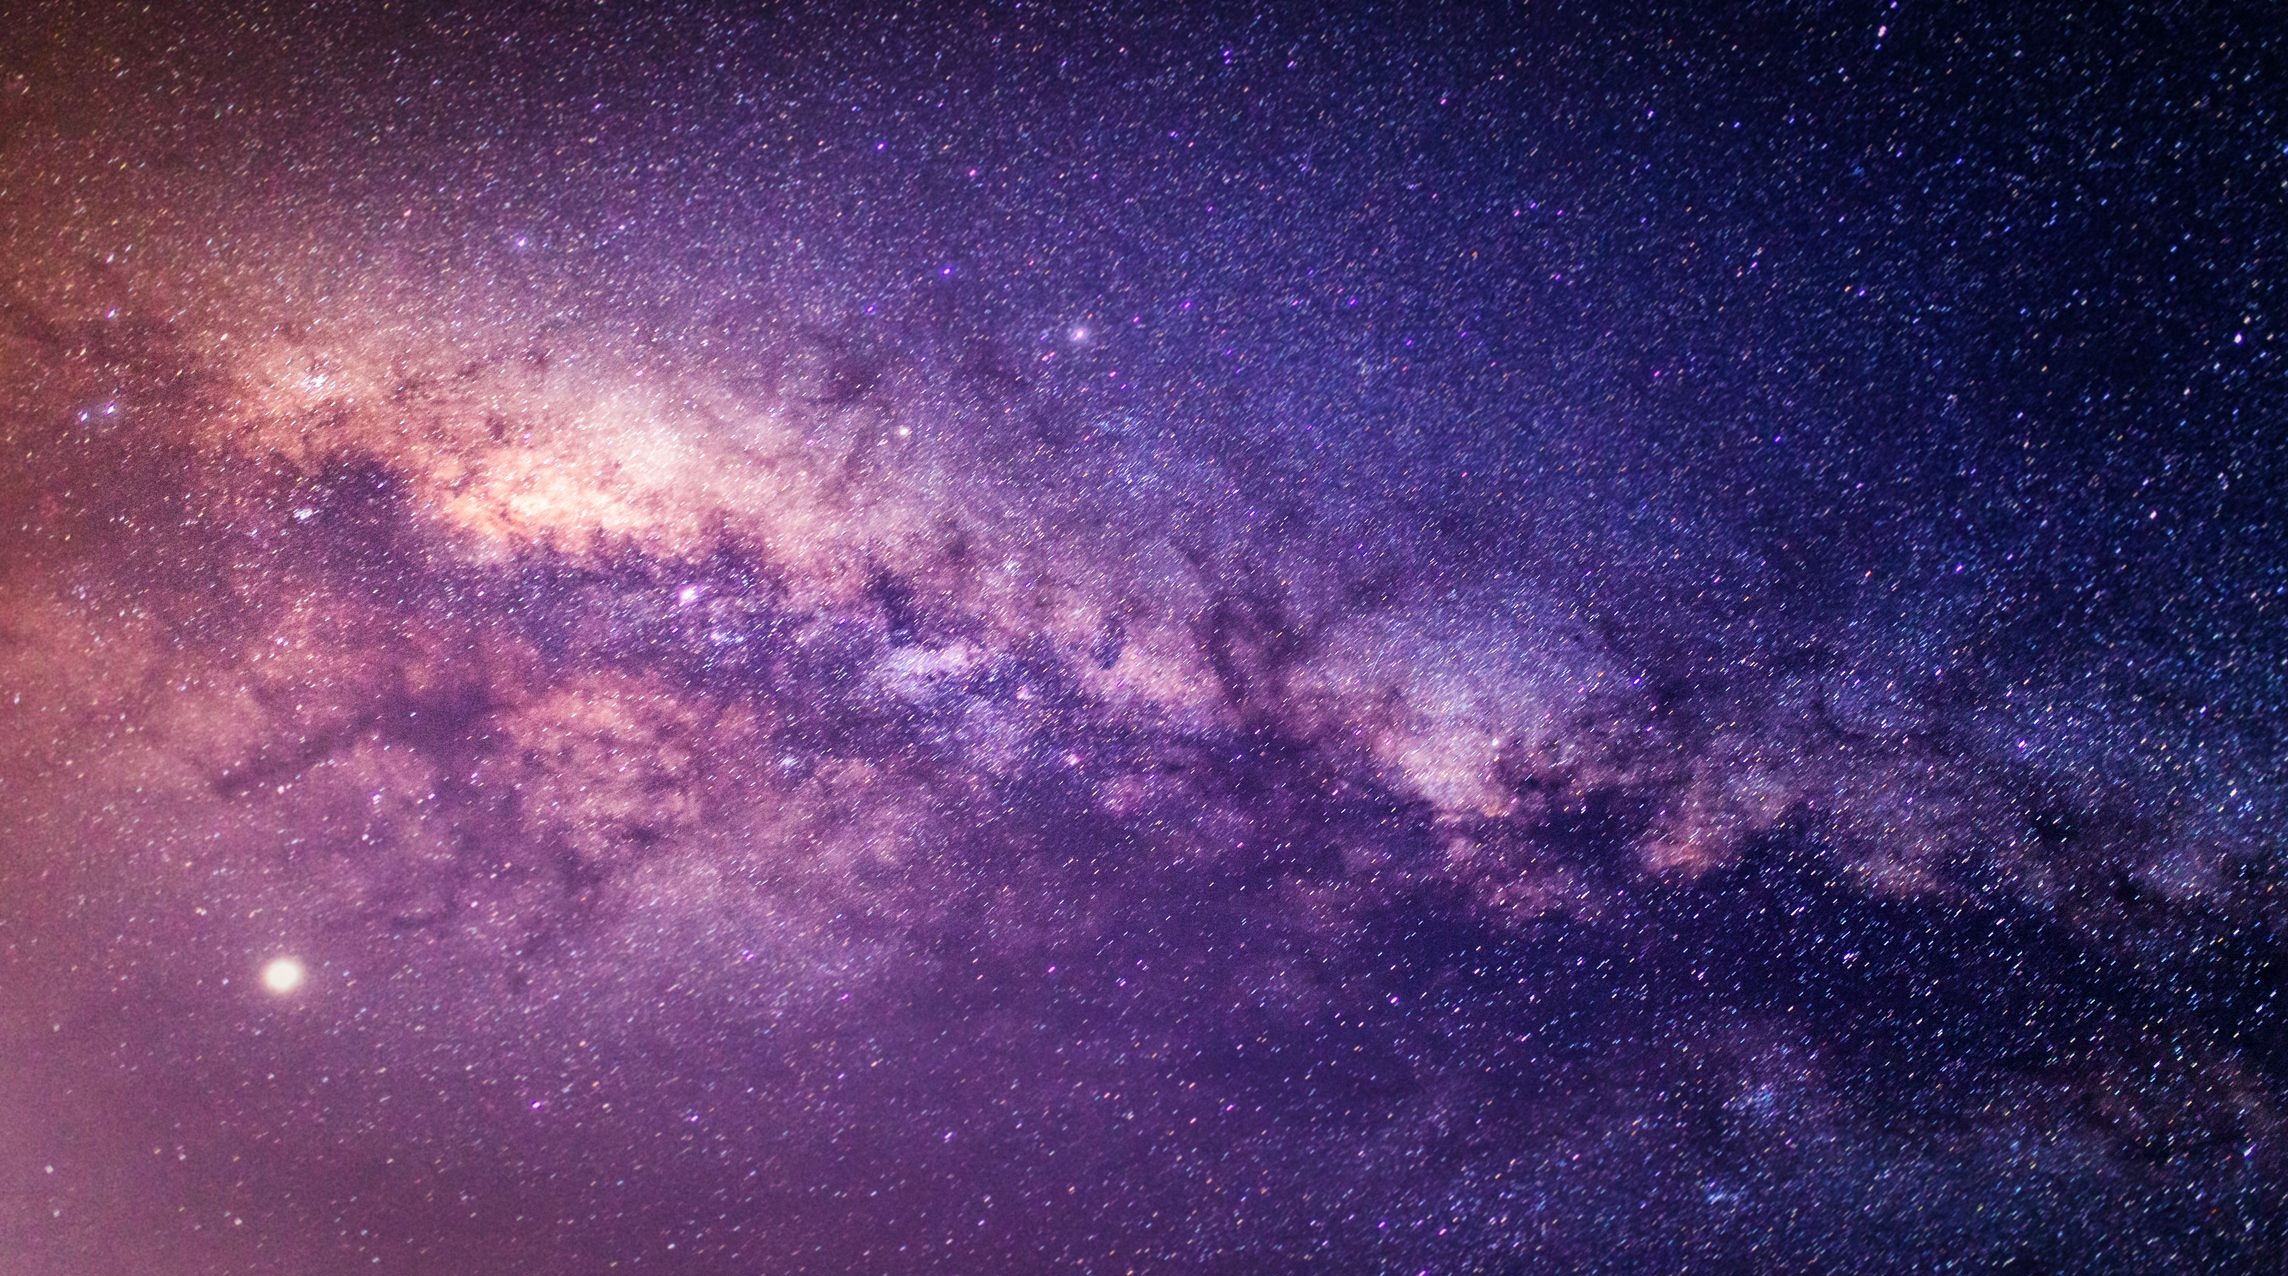 10 things you (probably) didn't know about the Milky Way